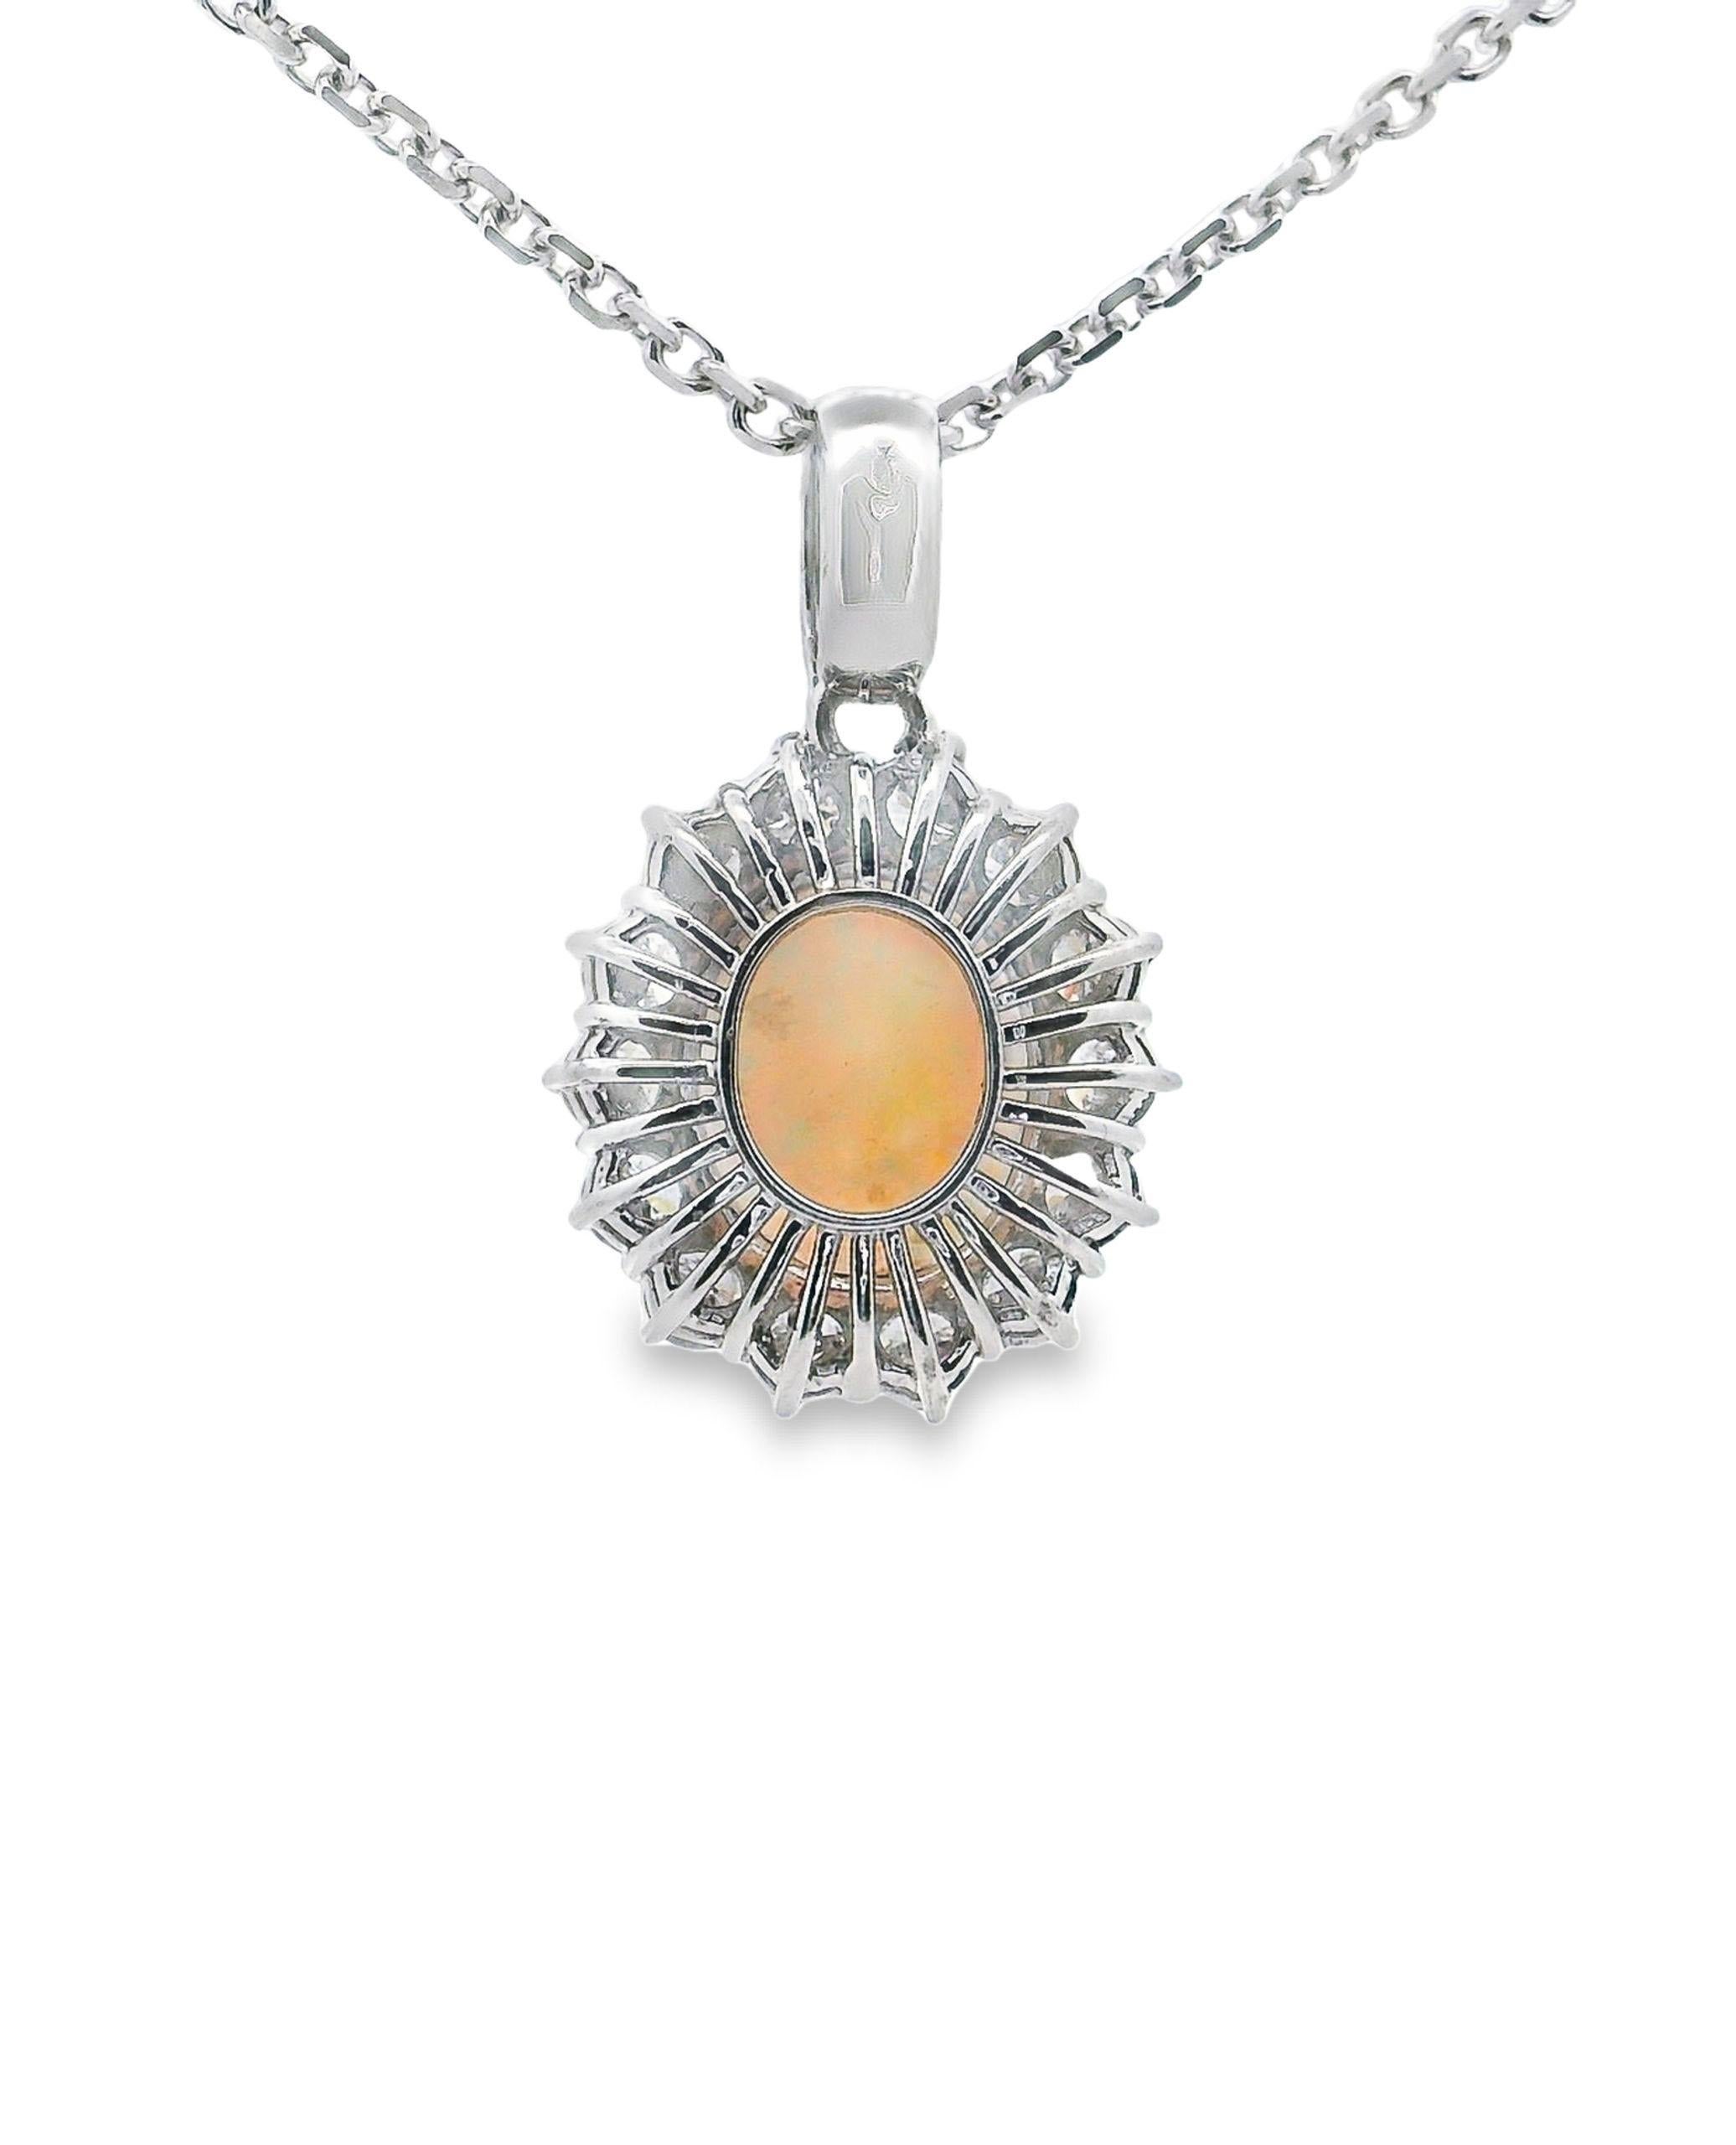 14K white gold pendant furnished with a halo of 14 round, brilliant-cut diamonds weighing 1.86 carats total. Featured in the center is one 11x14mm oval opal weighing 3.60 carats. The pendant slides on a diamond cut cable chain, 16 inches long.